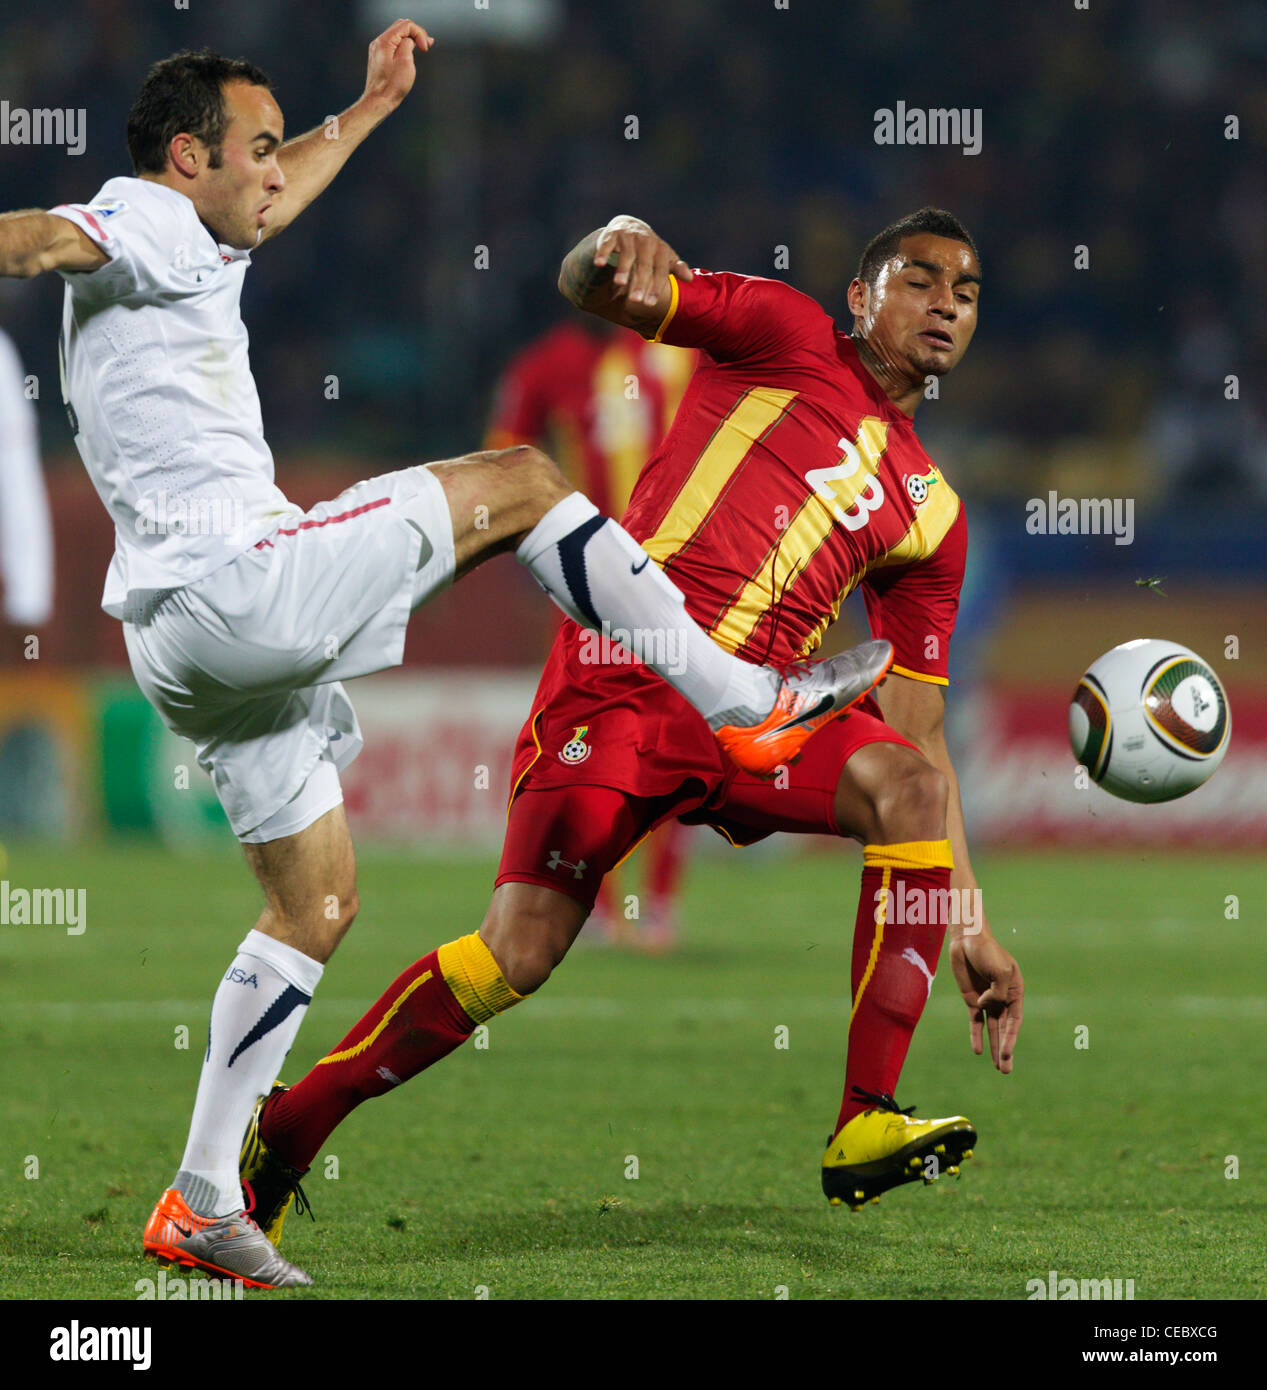 Landon Donovan of the USA (L) kicks the ball in front of Kevin Prince Boateng of Ghana (R) during a FIFA World Cup match. Stock Photo